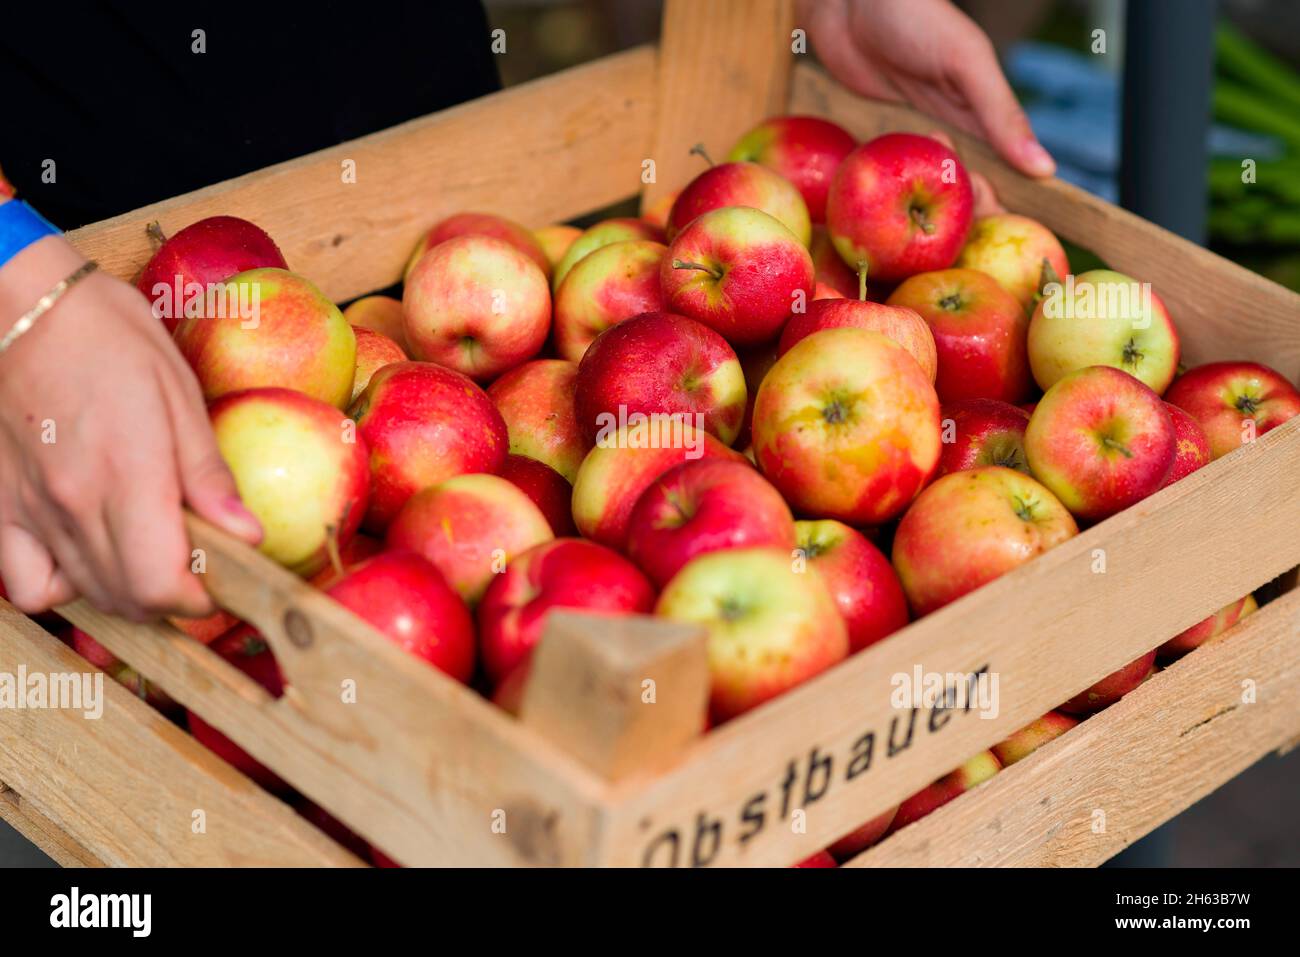 woman carries a fruit crate with apples Stock Photo